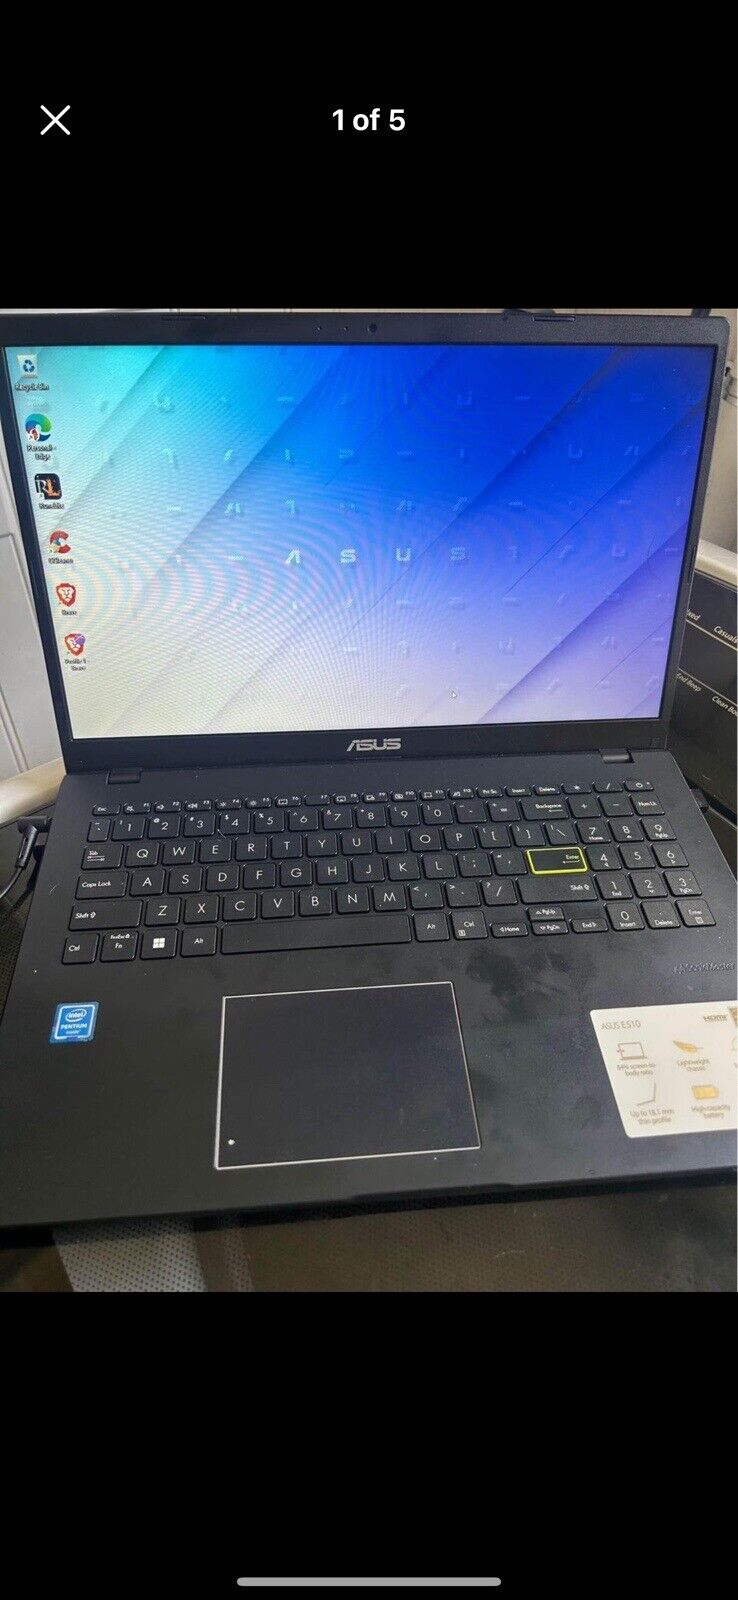 ASUS E510 LAPTOP with charger